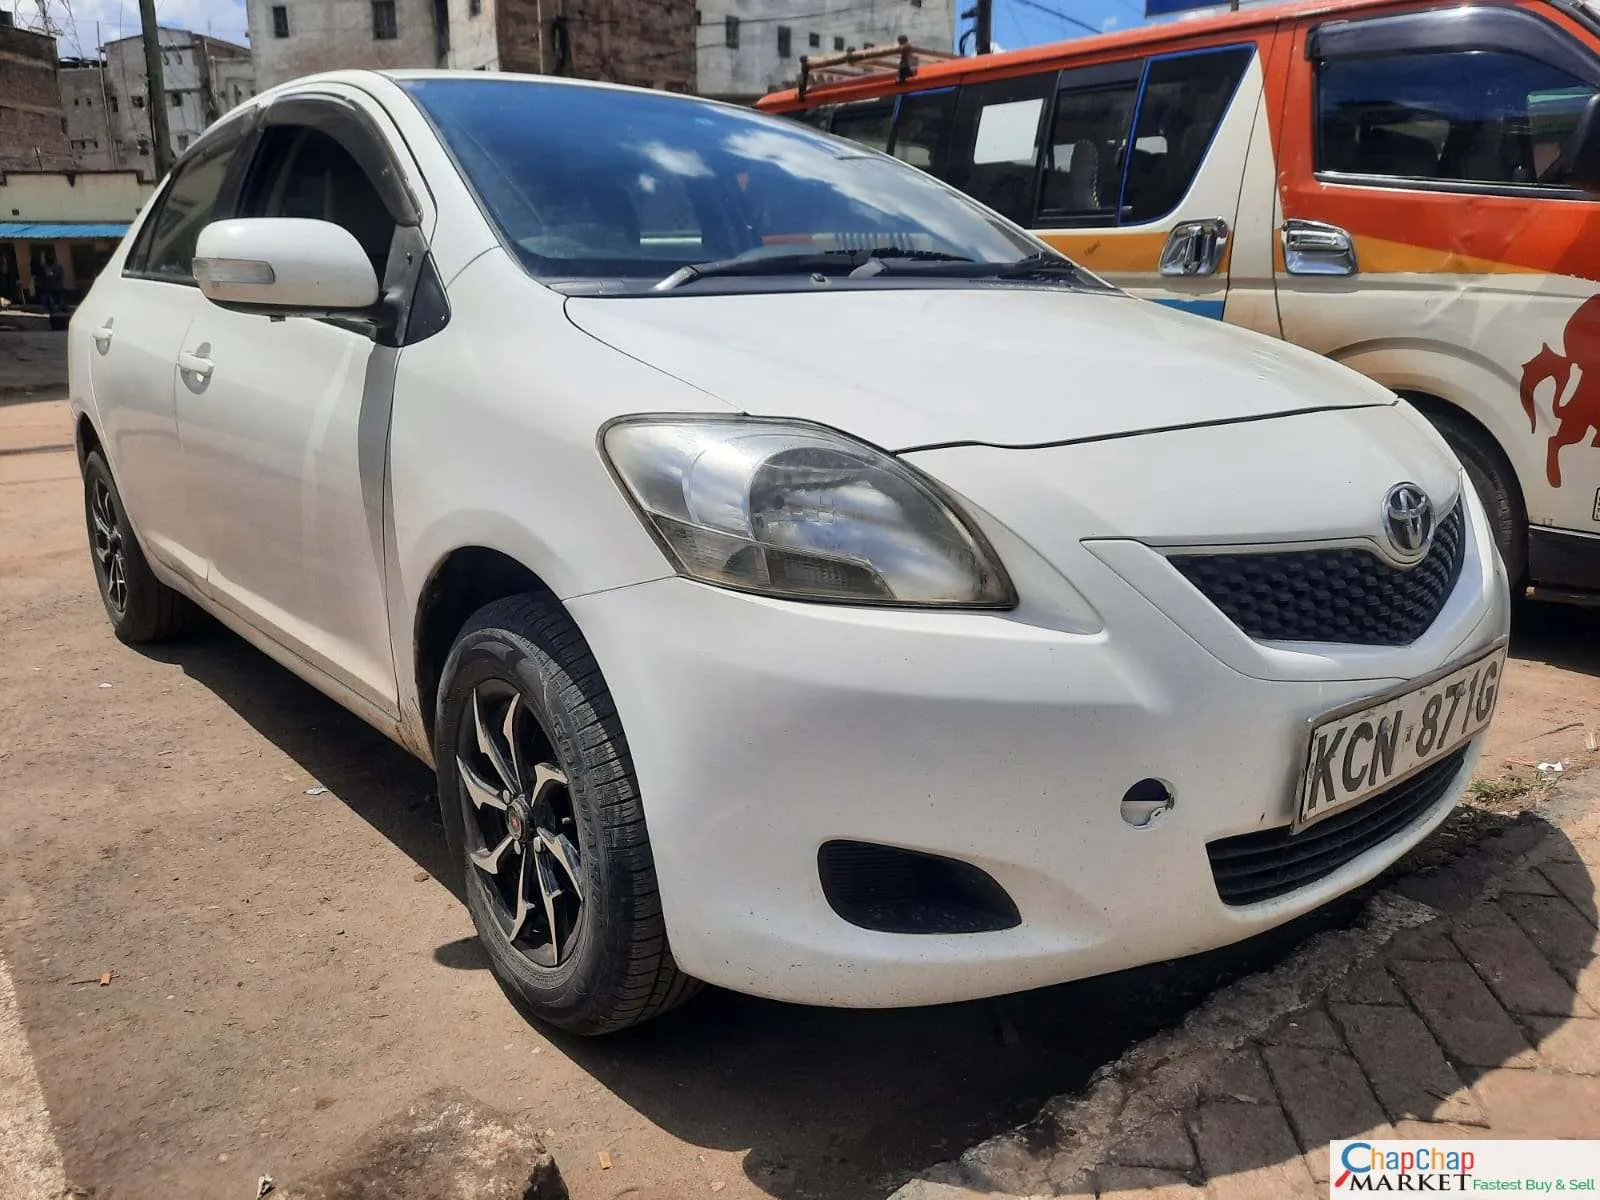 Cars Cars For Sale-Toyota BELTA 1300cc QUICK SALE You Pay 30% Deposit Trade in OK EXCLUSIVE Toyota belta for sale in kenya hire purchase installments 7